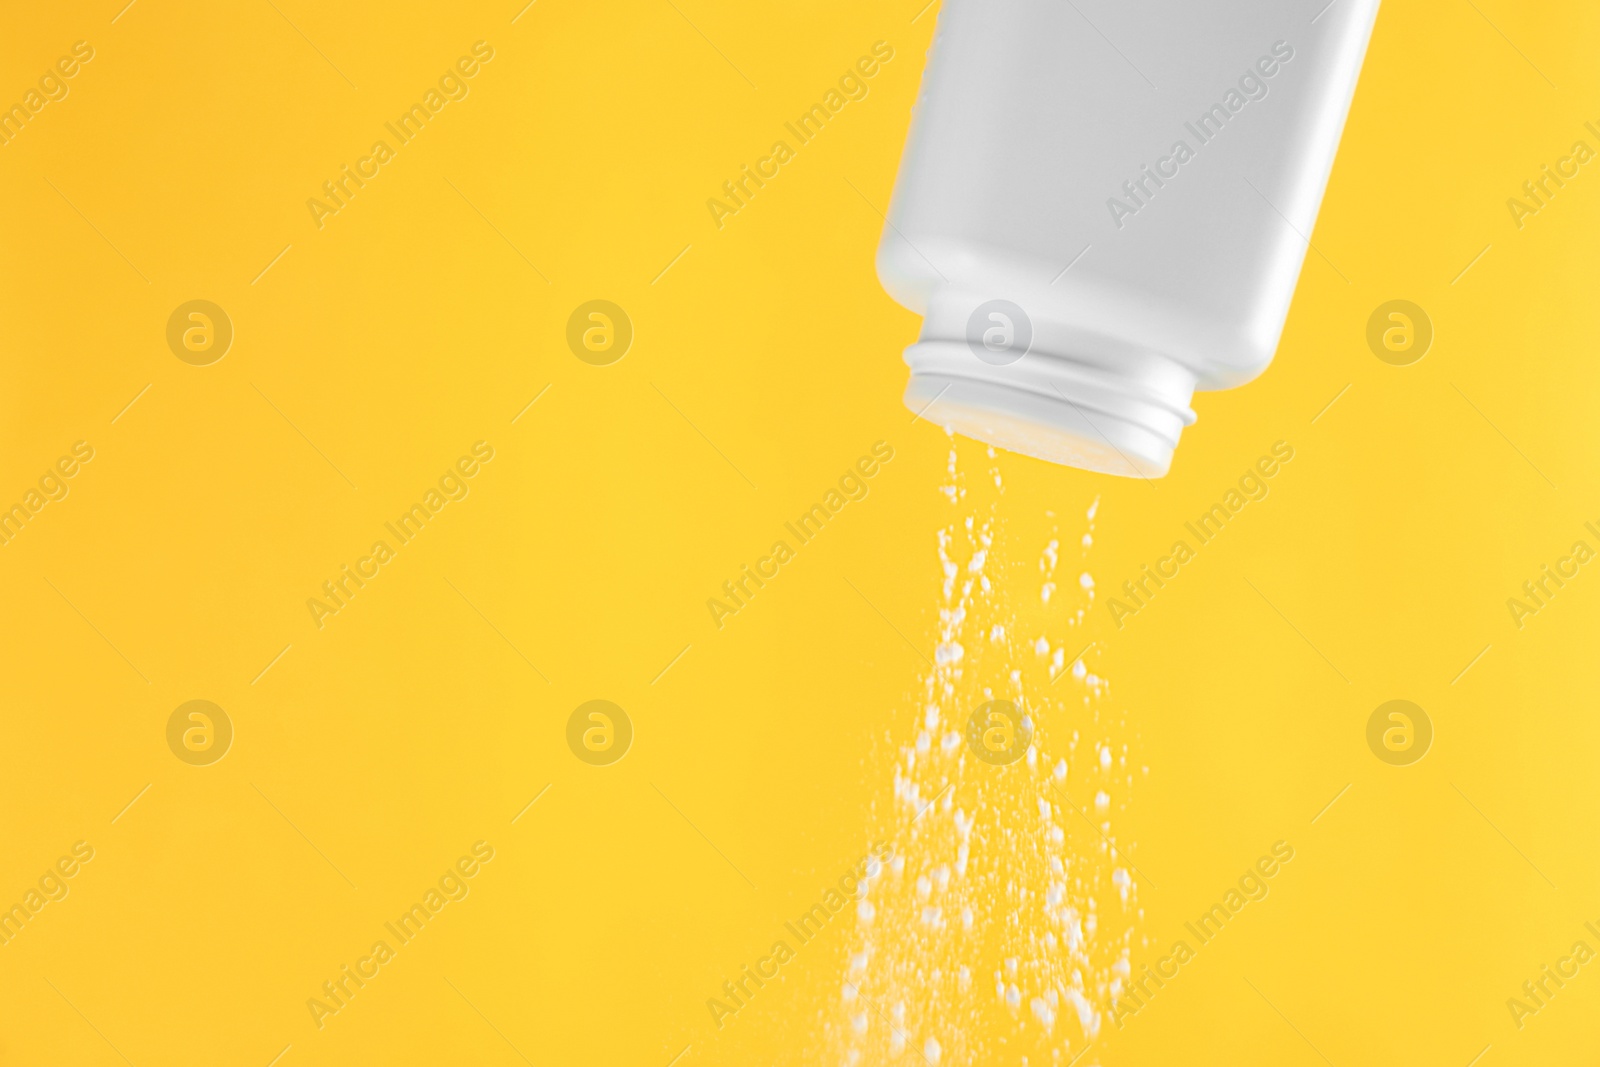 Photo of Scattering of dusting powder on orange background, space for text